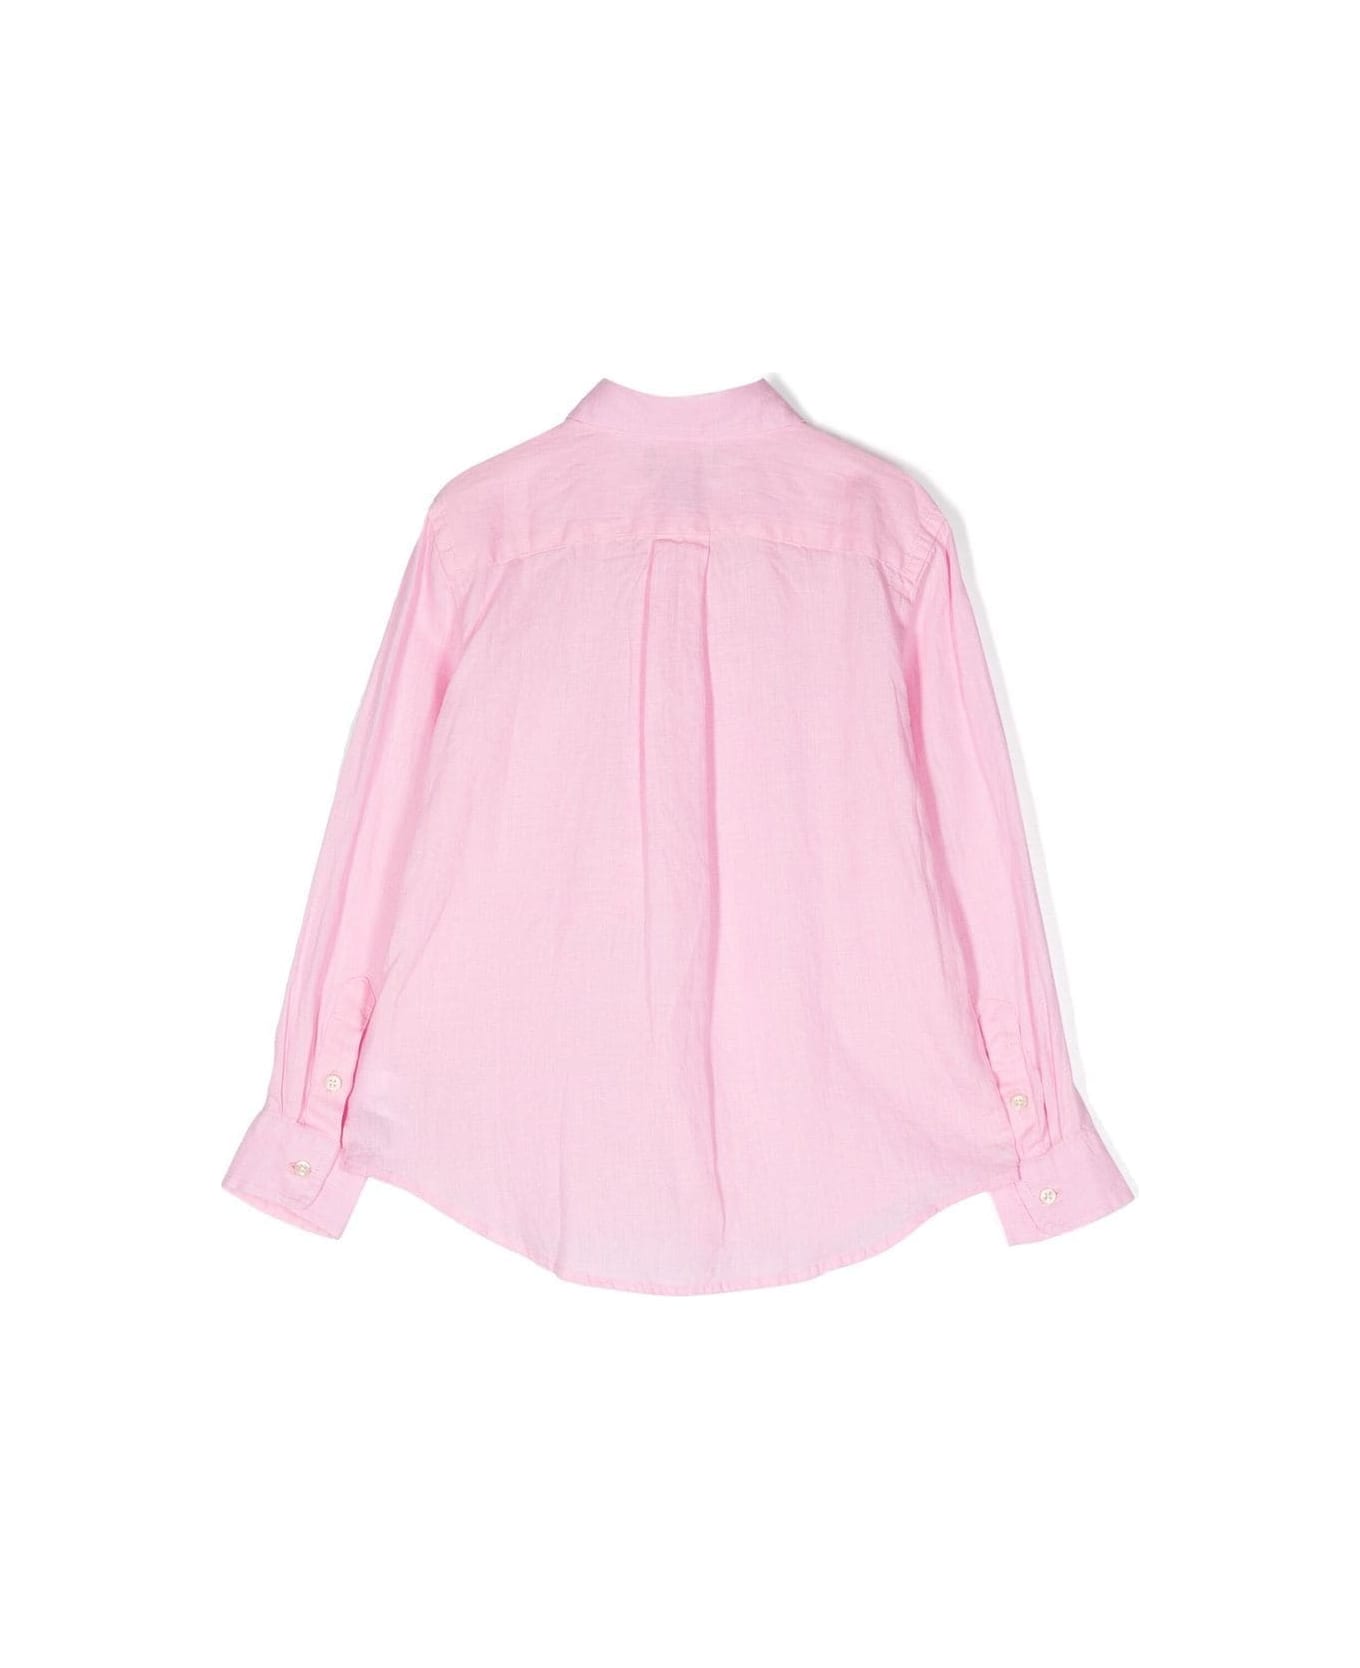 Ralph Lauren Pink Linen Shirt With Embroidered Pony - Pink